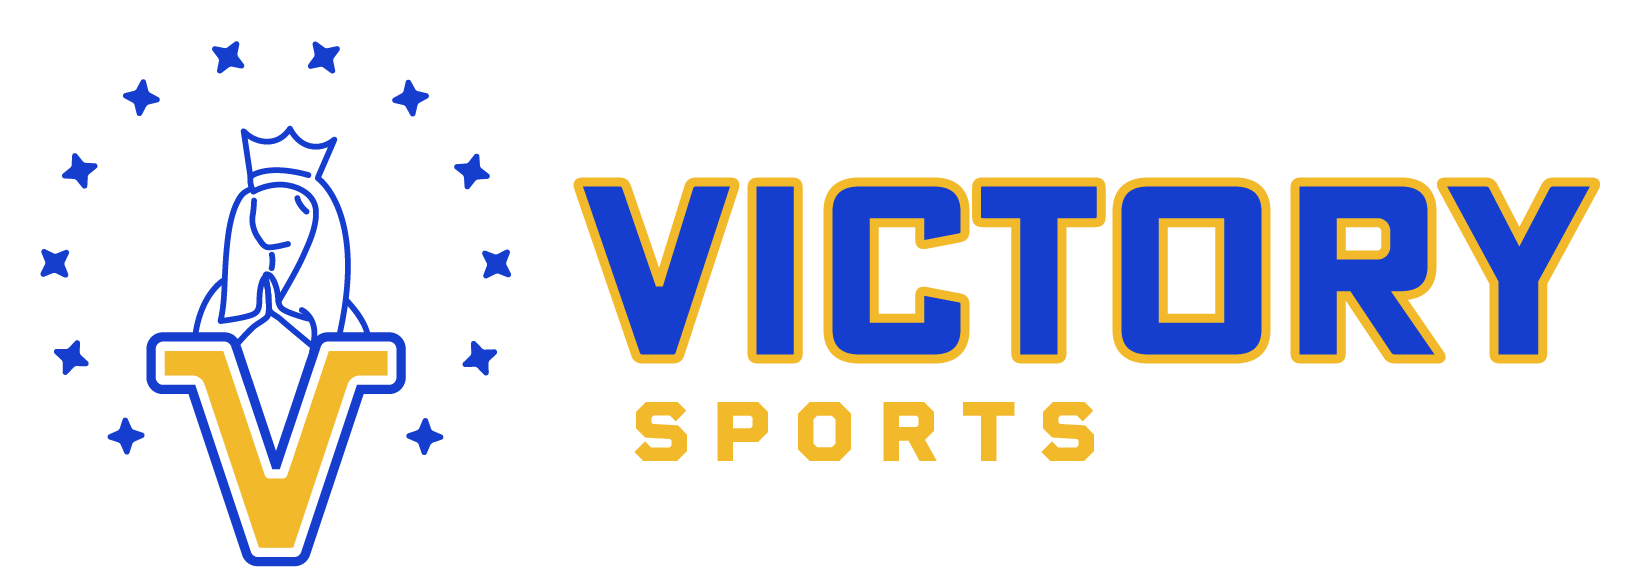 schedule-victory-sports